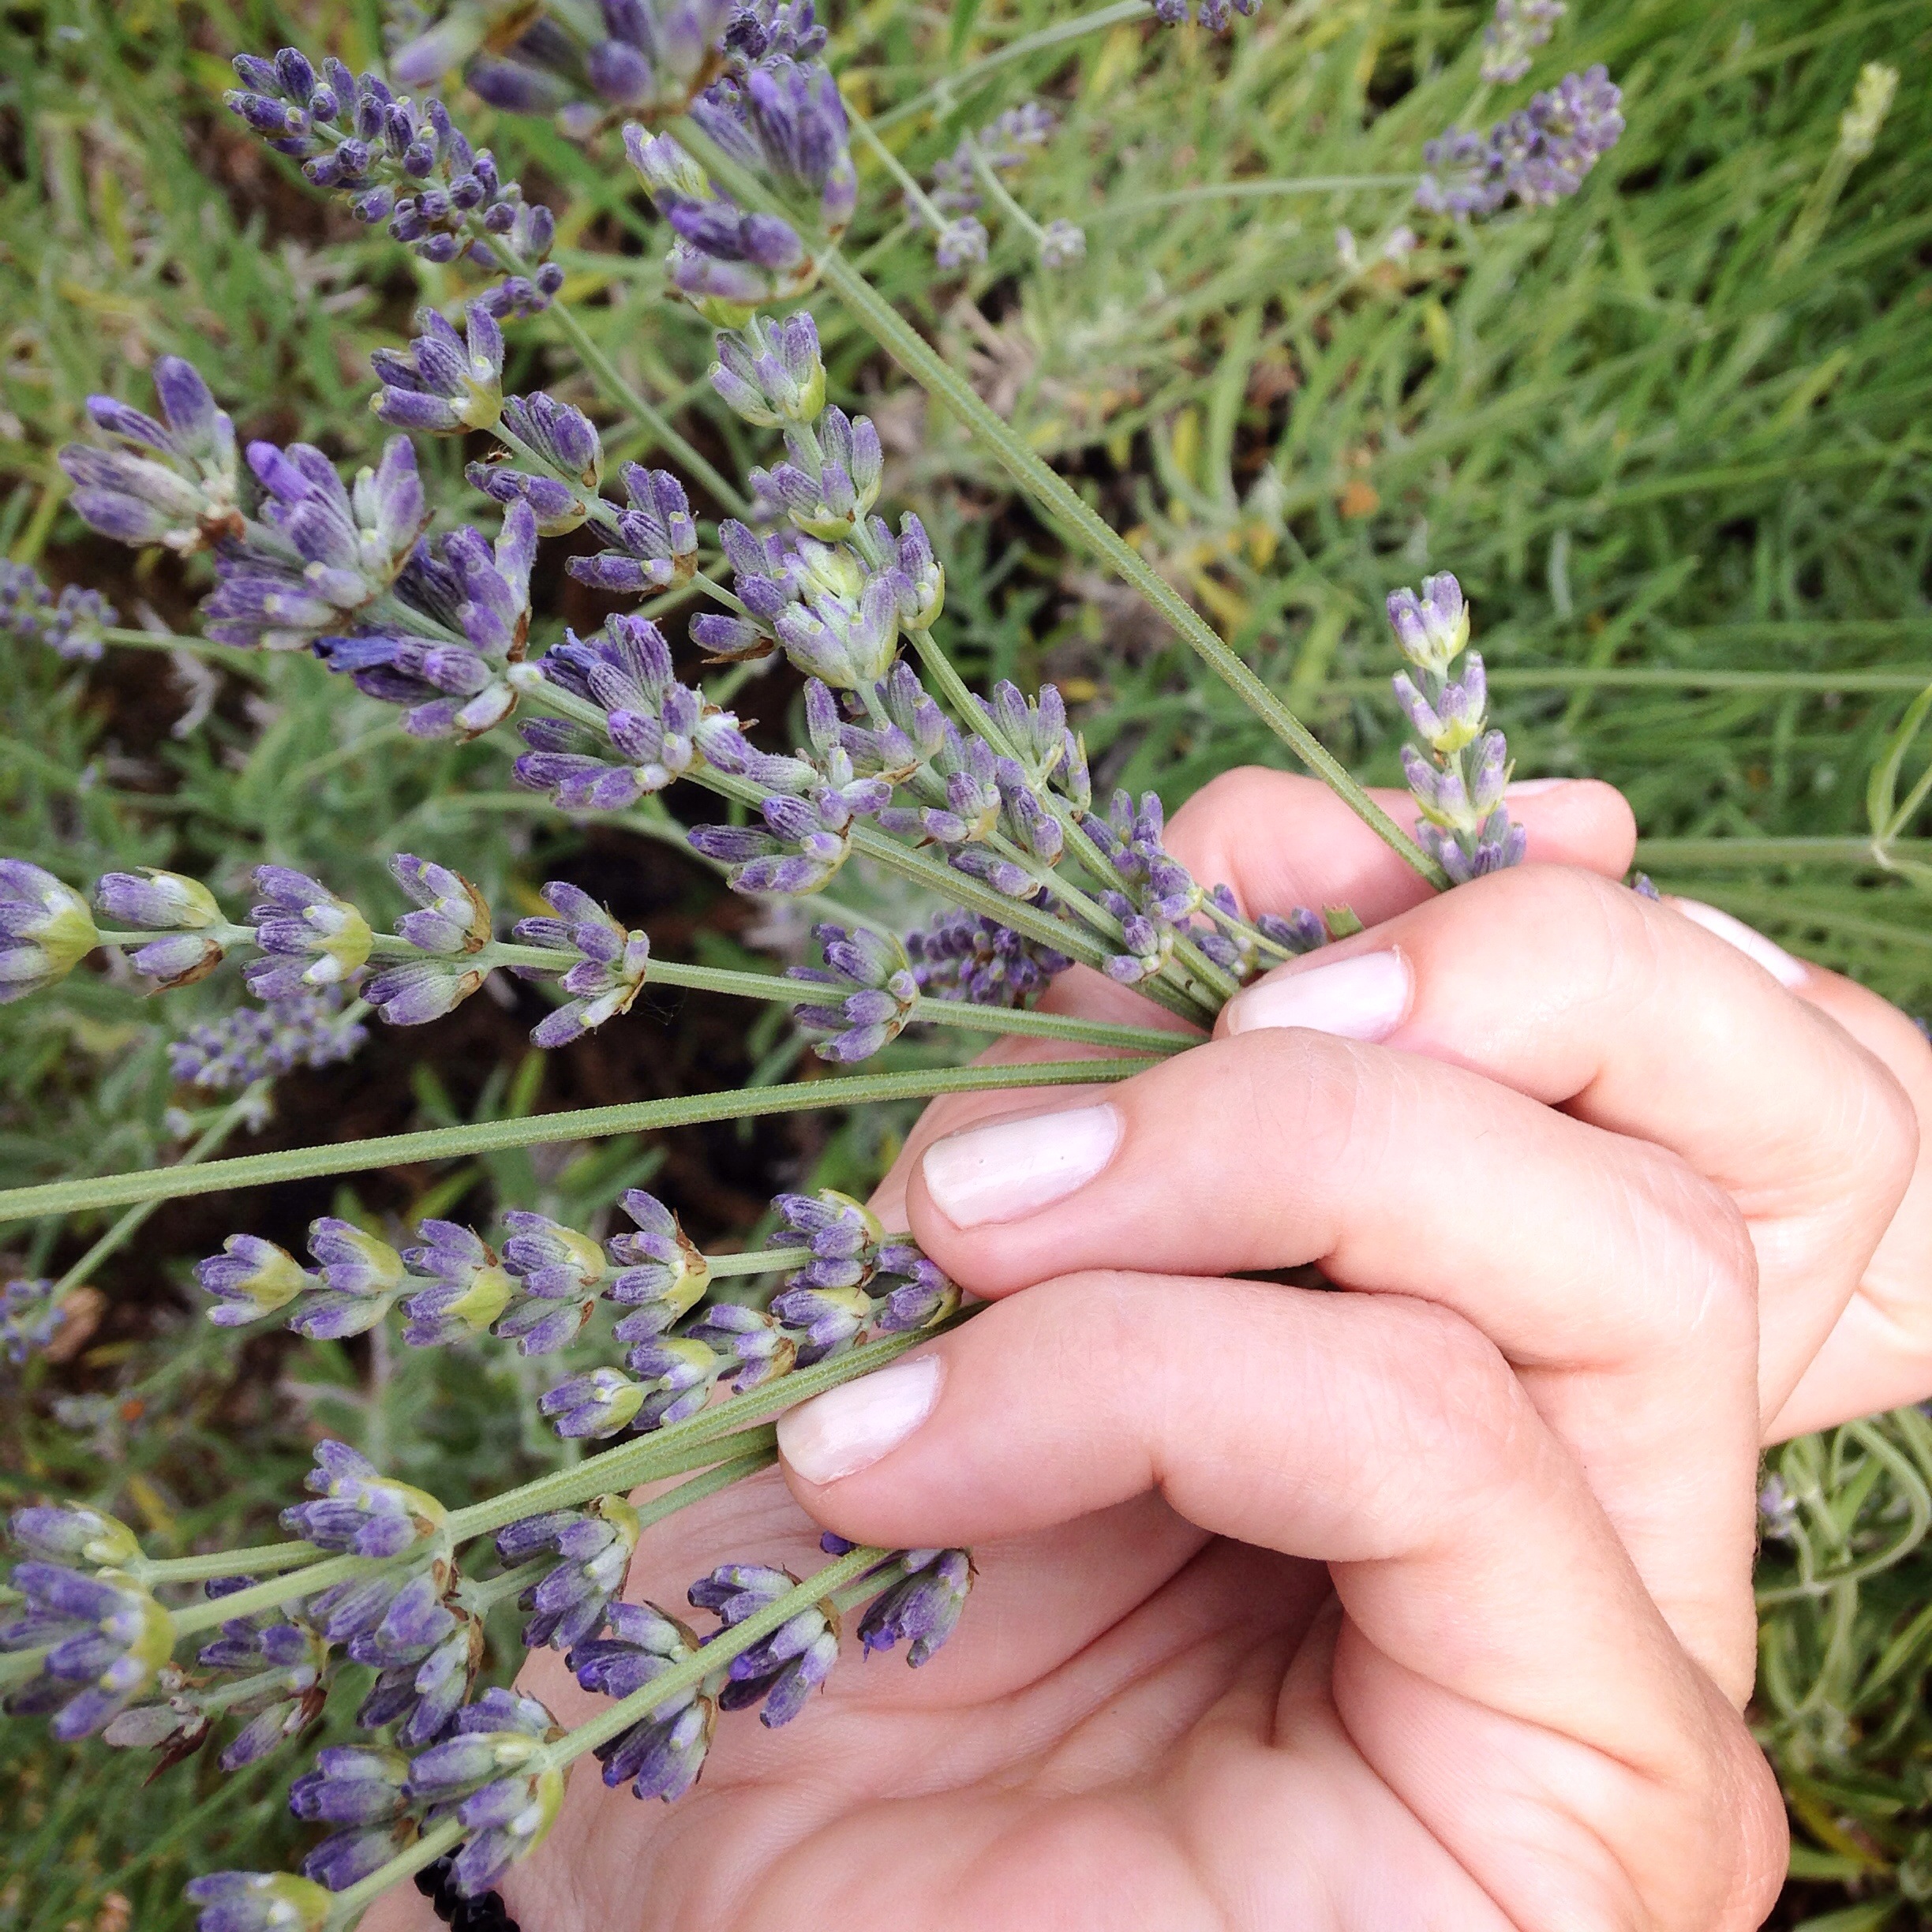 Stop and smell the lavender | EAT.PRAY.MOVE Yoga Retreats | Provence, France